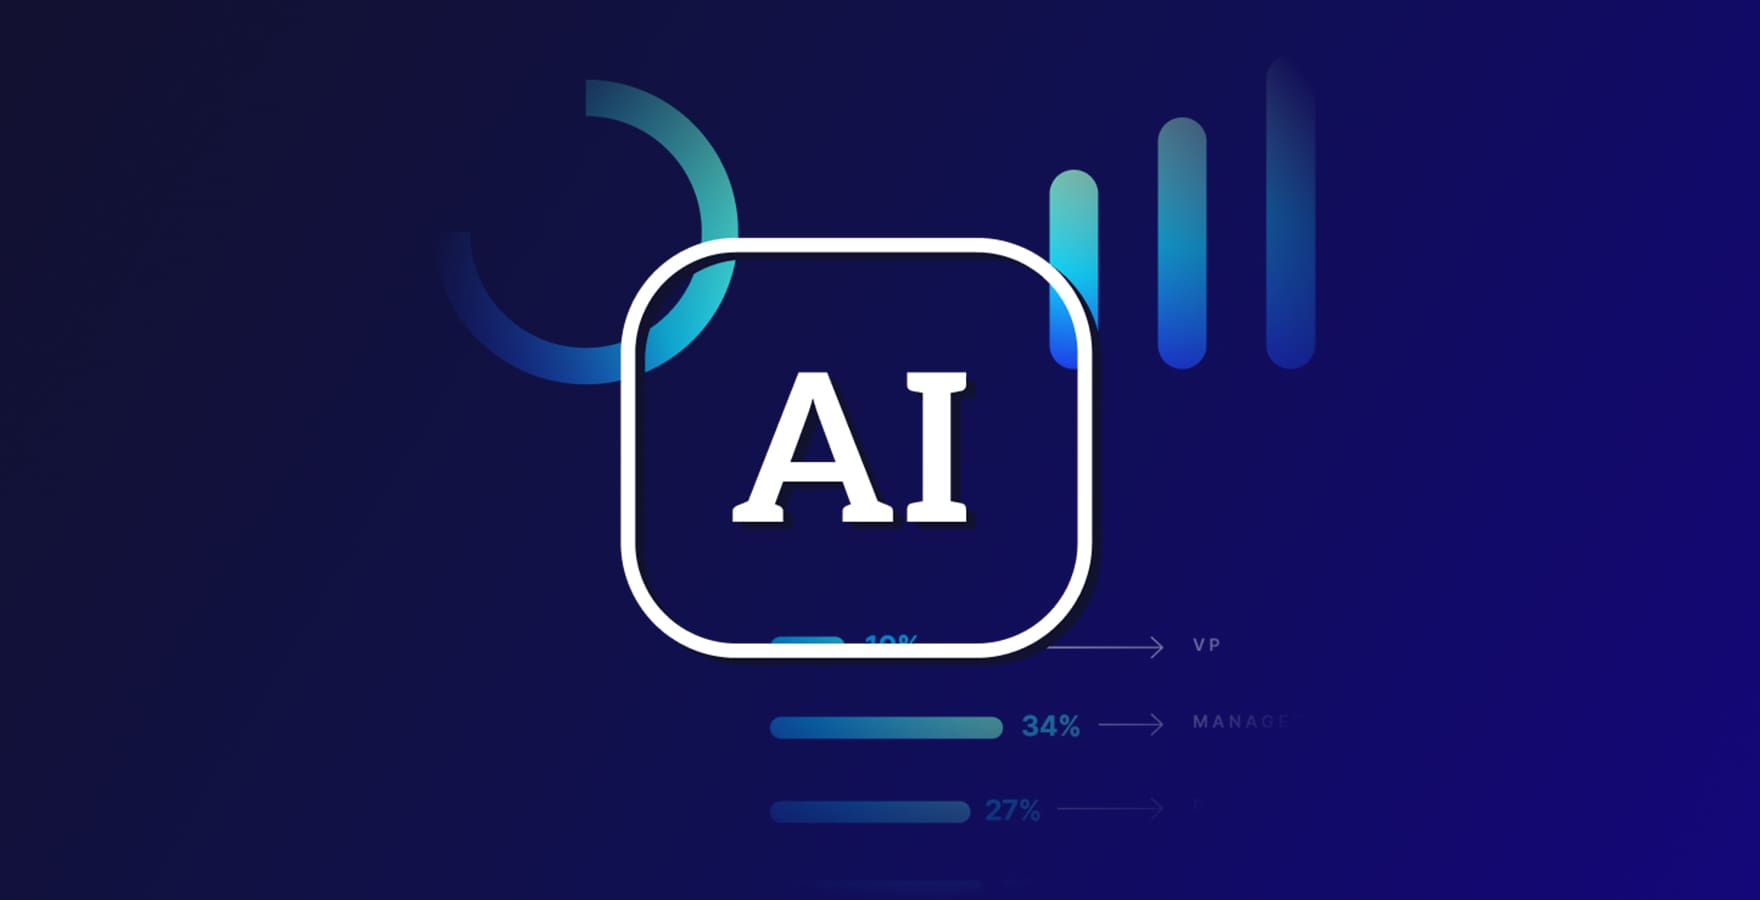 The Three Biggest Takeaways from the AI in Competitive Intelligence Report